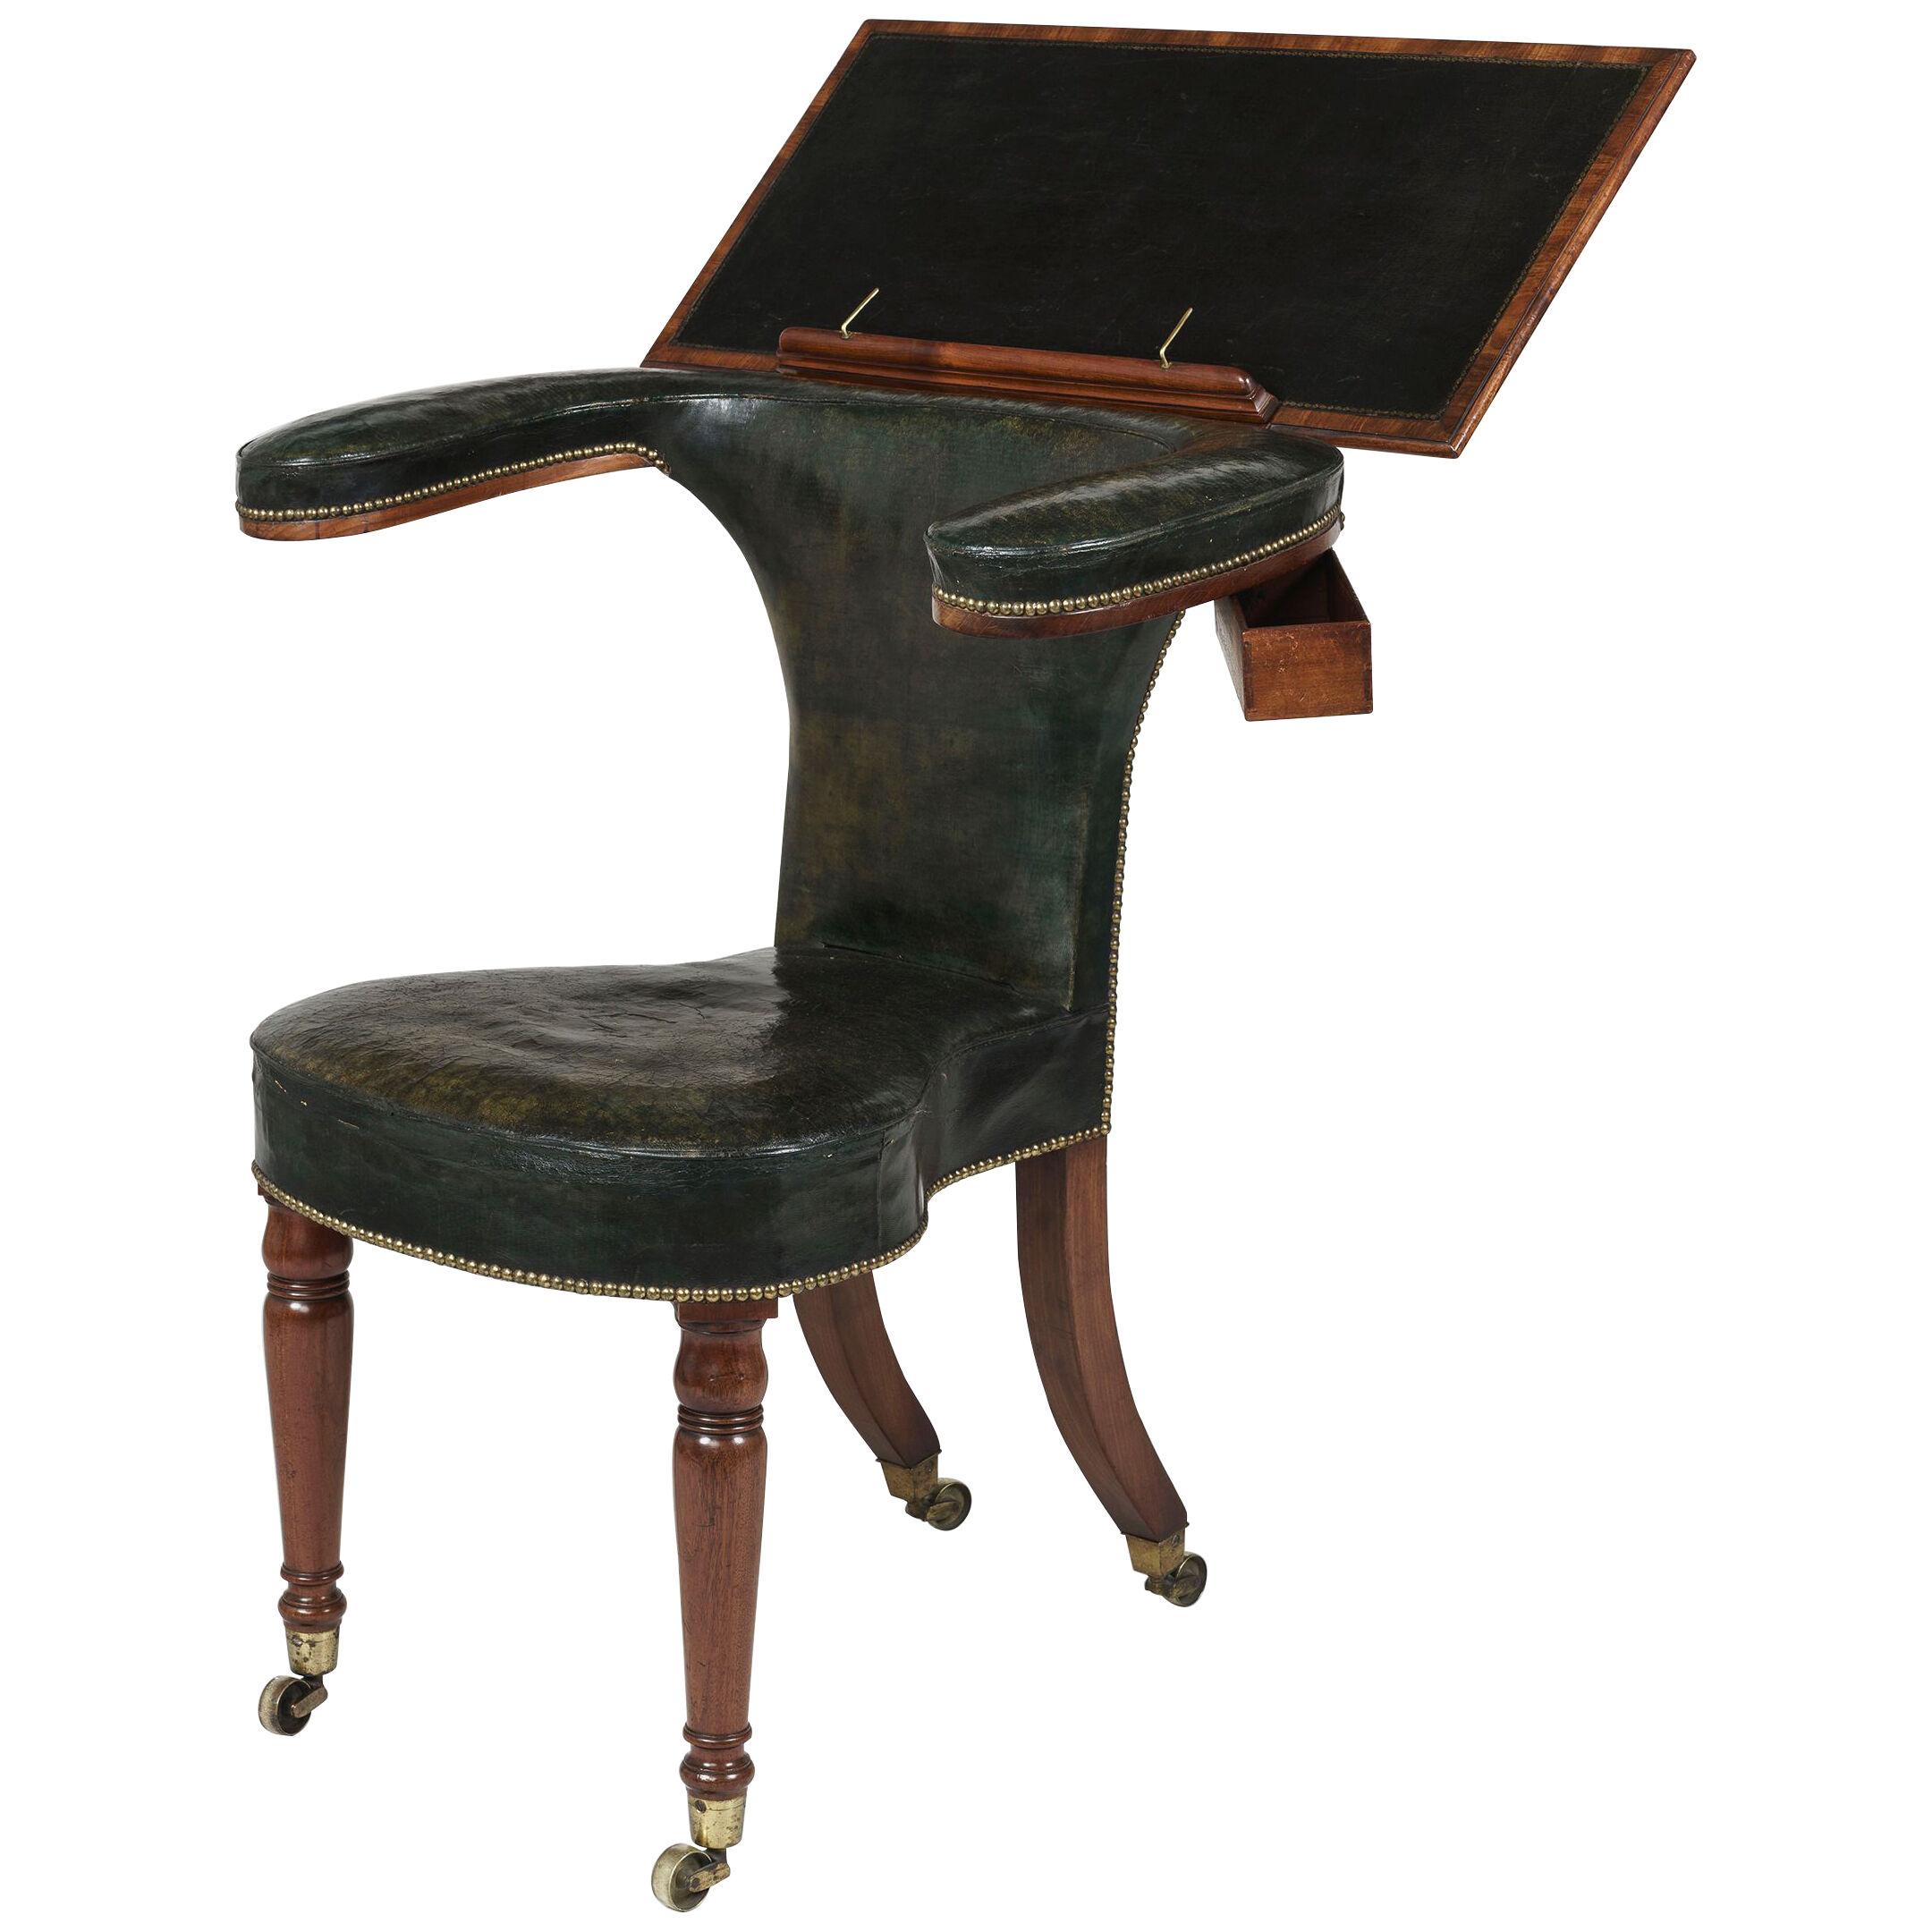  Georgian Library Reading Chair after a design by Thomas Sheraton